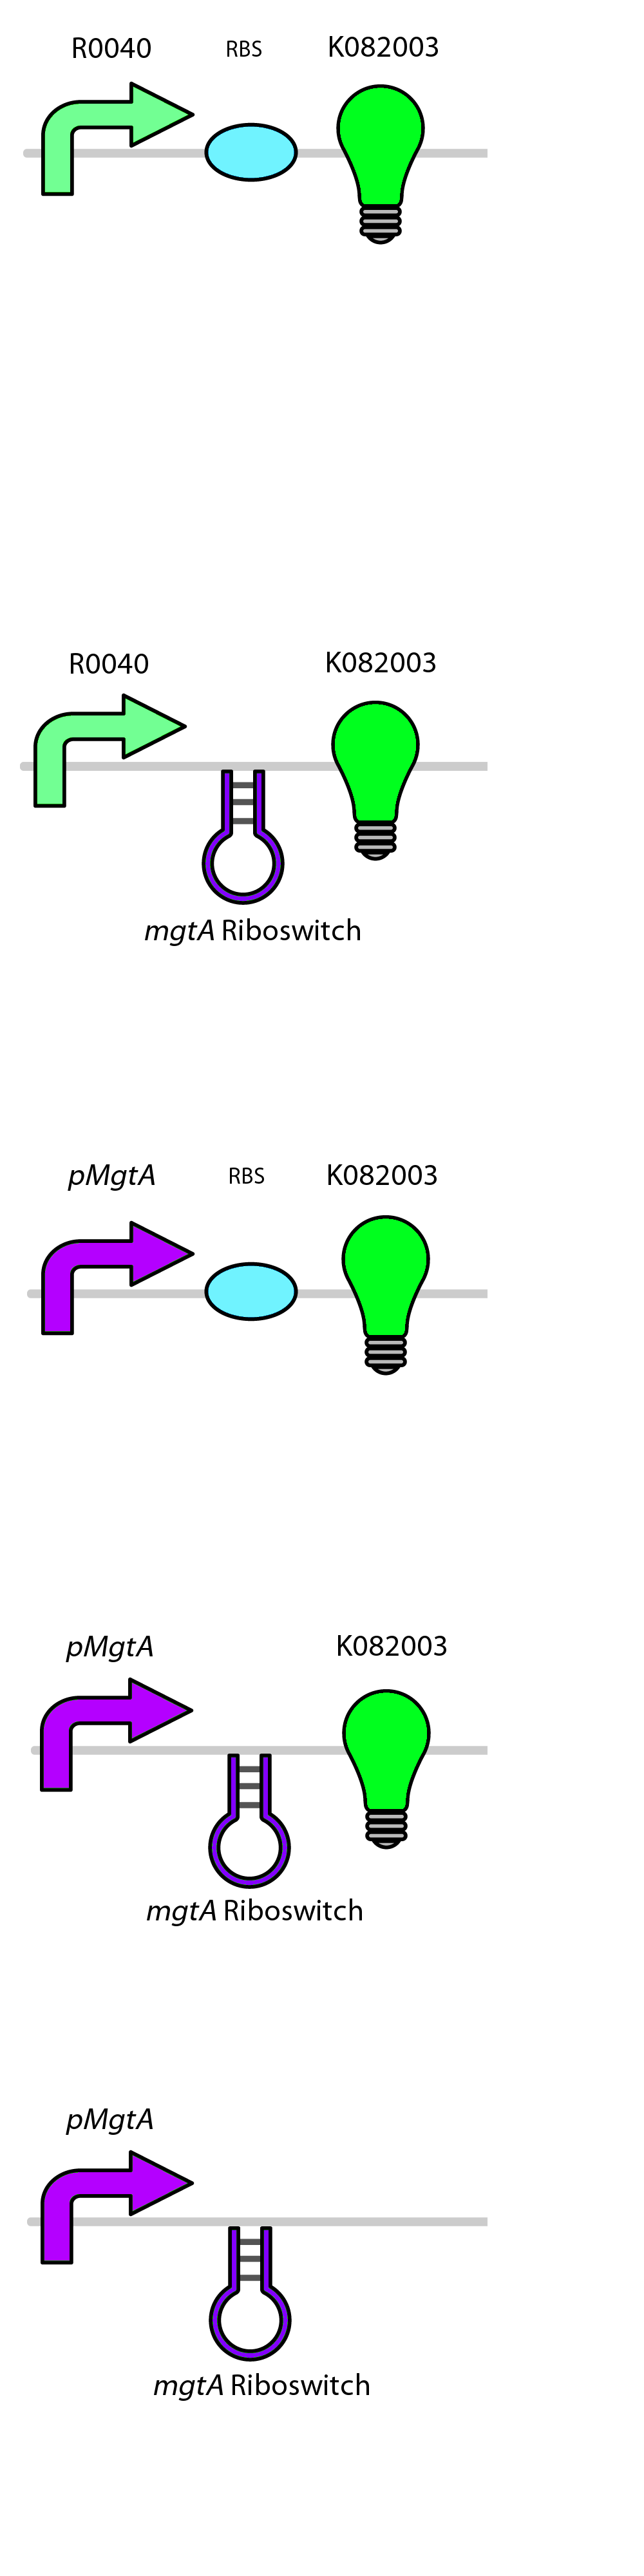 Figure 3: In these set of circuits, TetR-RBS-K082003 serves as a positive control and the mgtAp-mgtArb serves as a negative control.